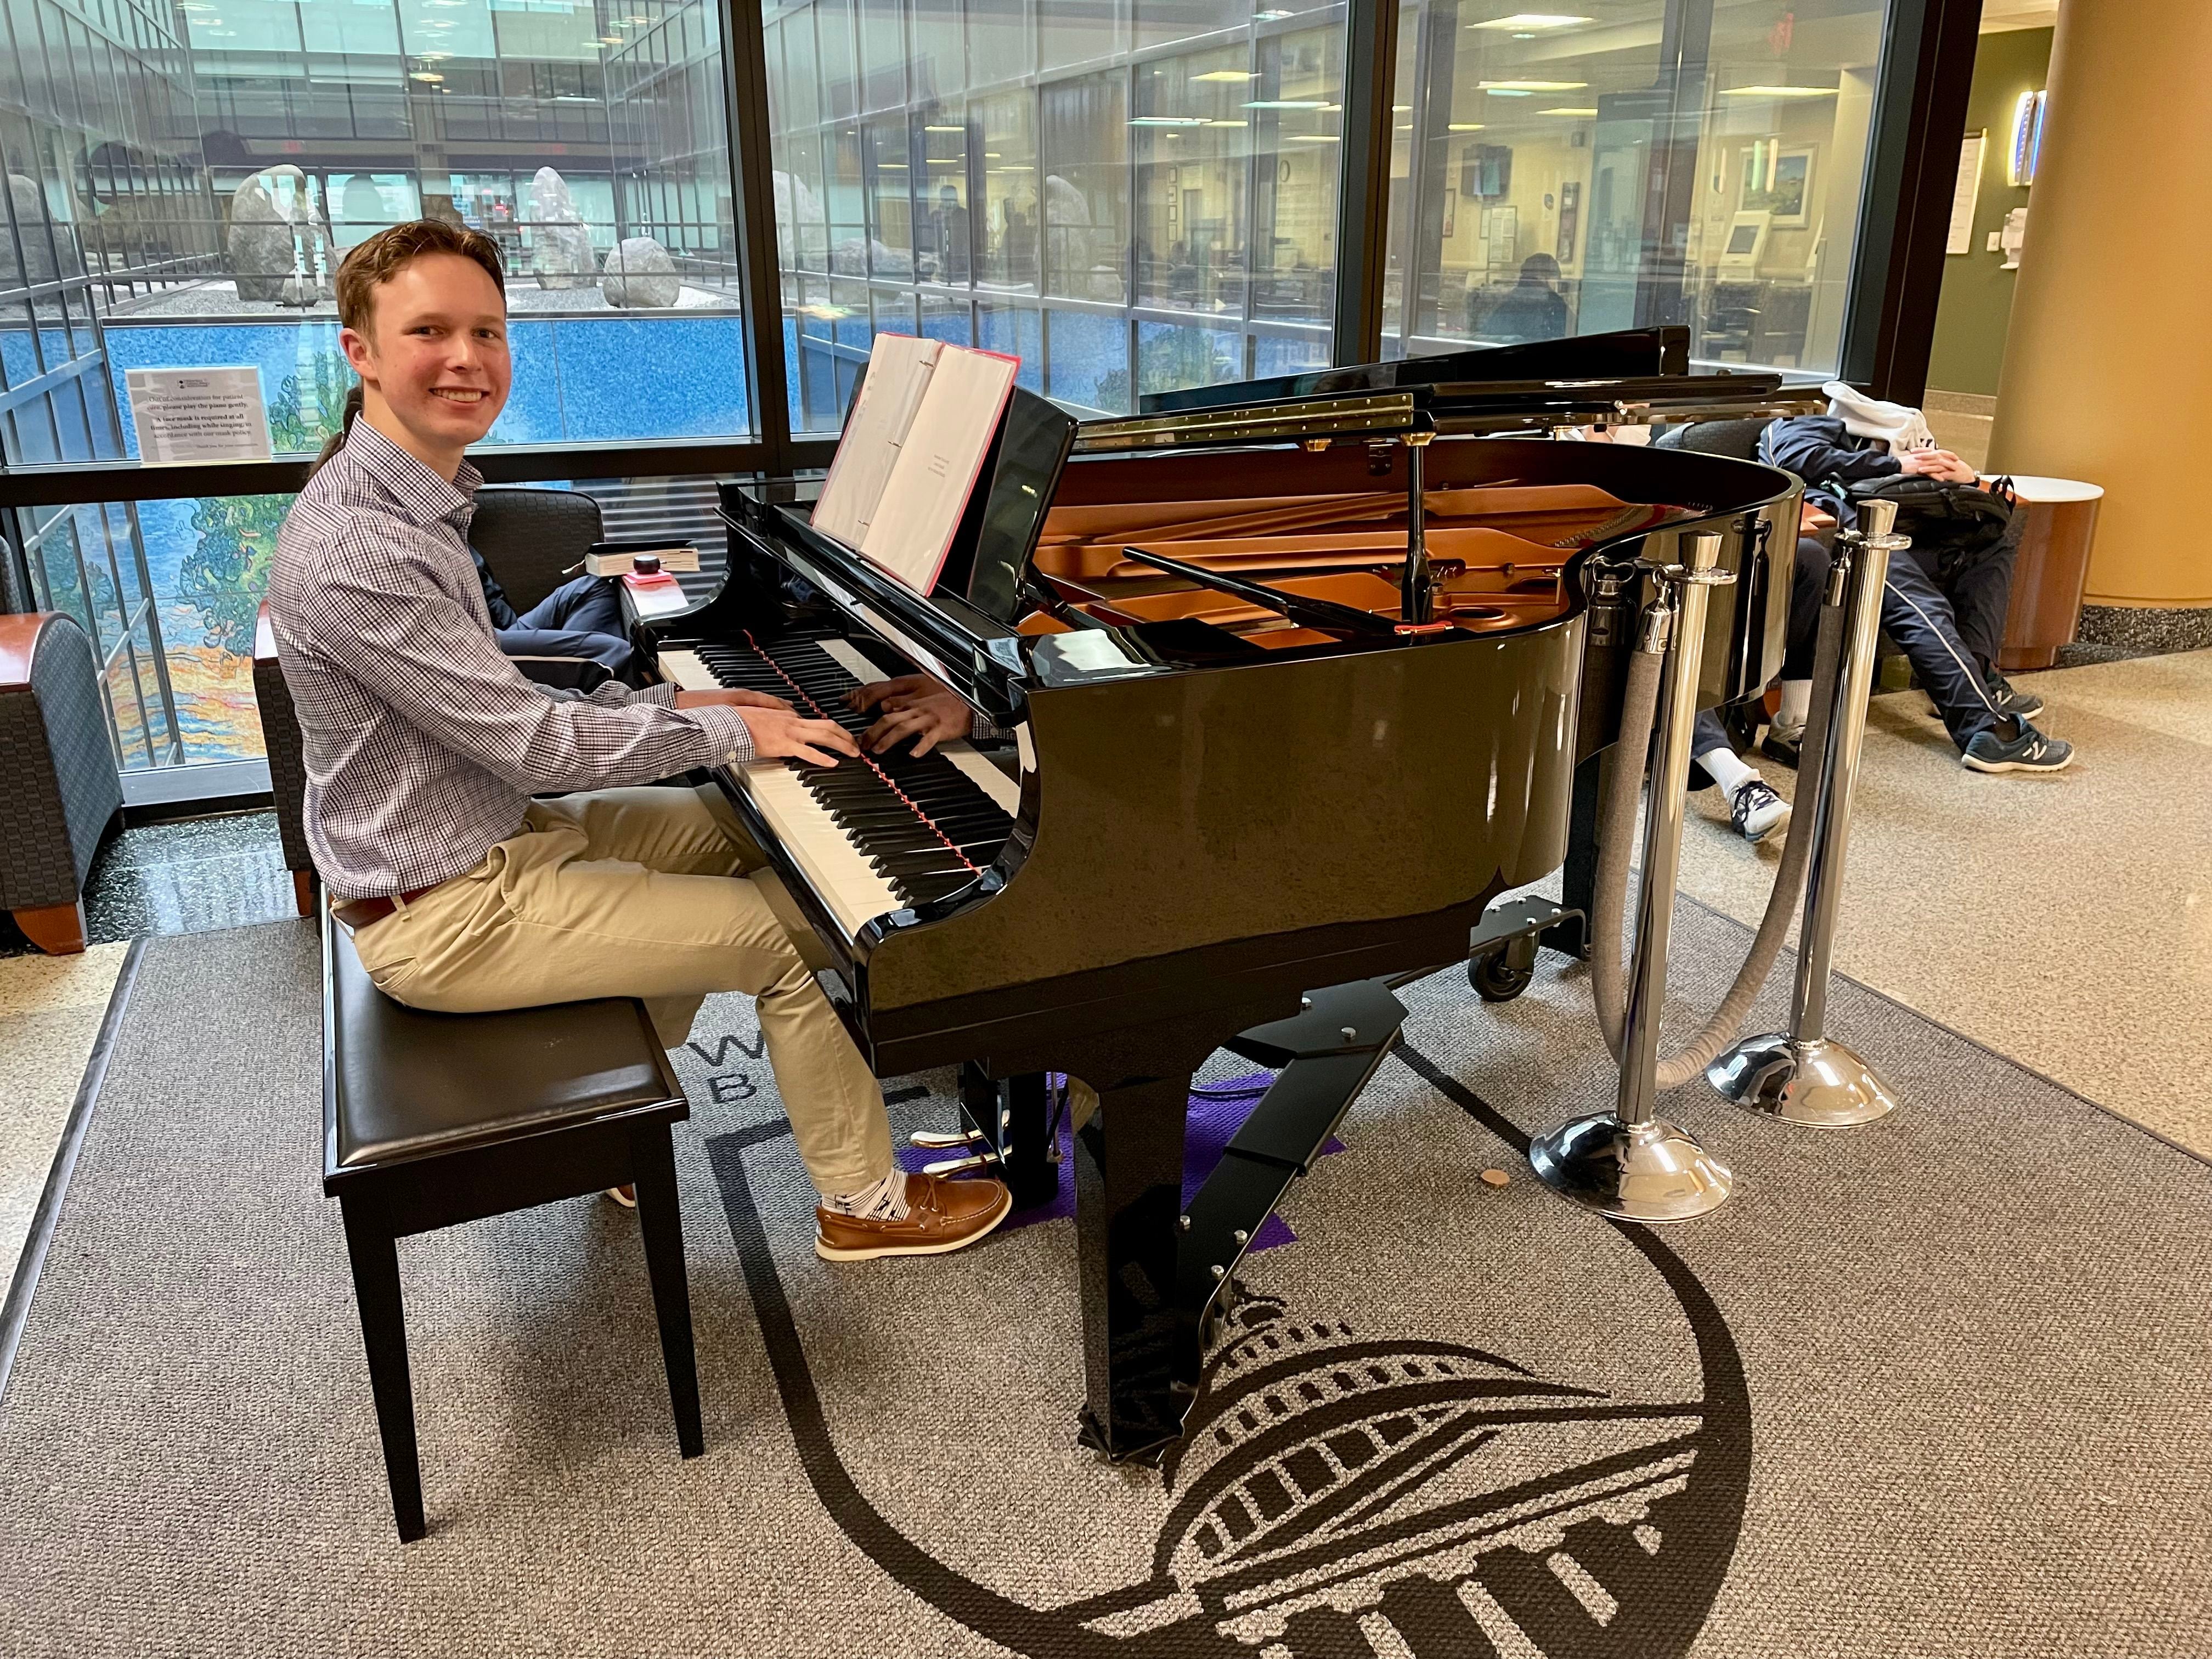 Mitchell Matella volunteers to play the piano for patients, staff and visitors at Walter Reed National Military Medical Center. (Courtesy  of Mitchell Matella)